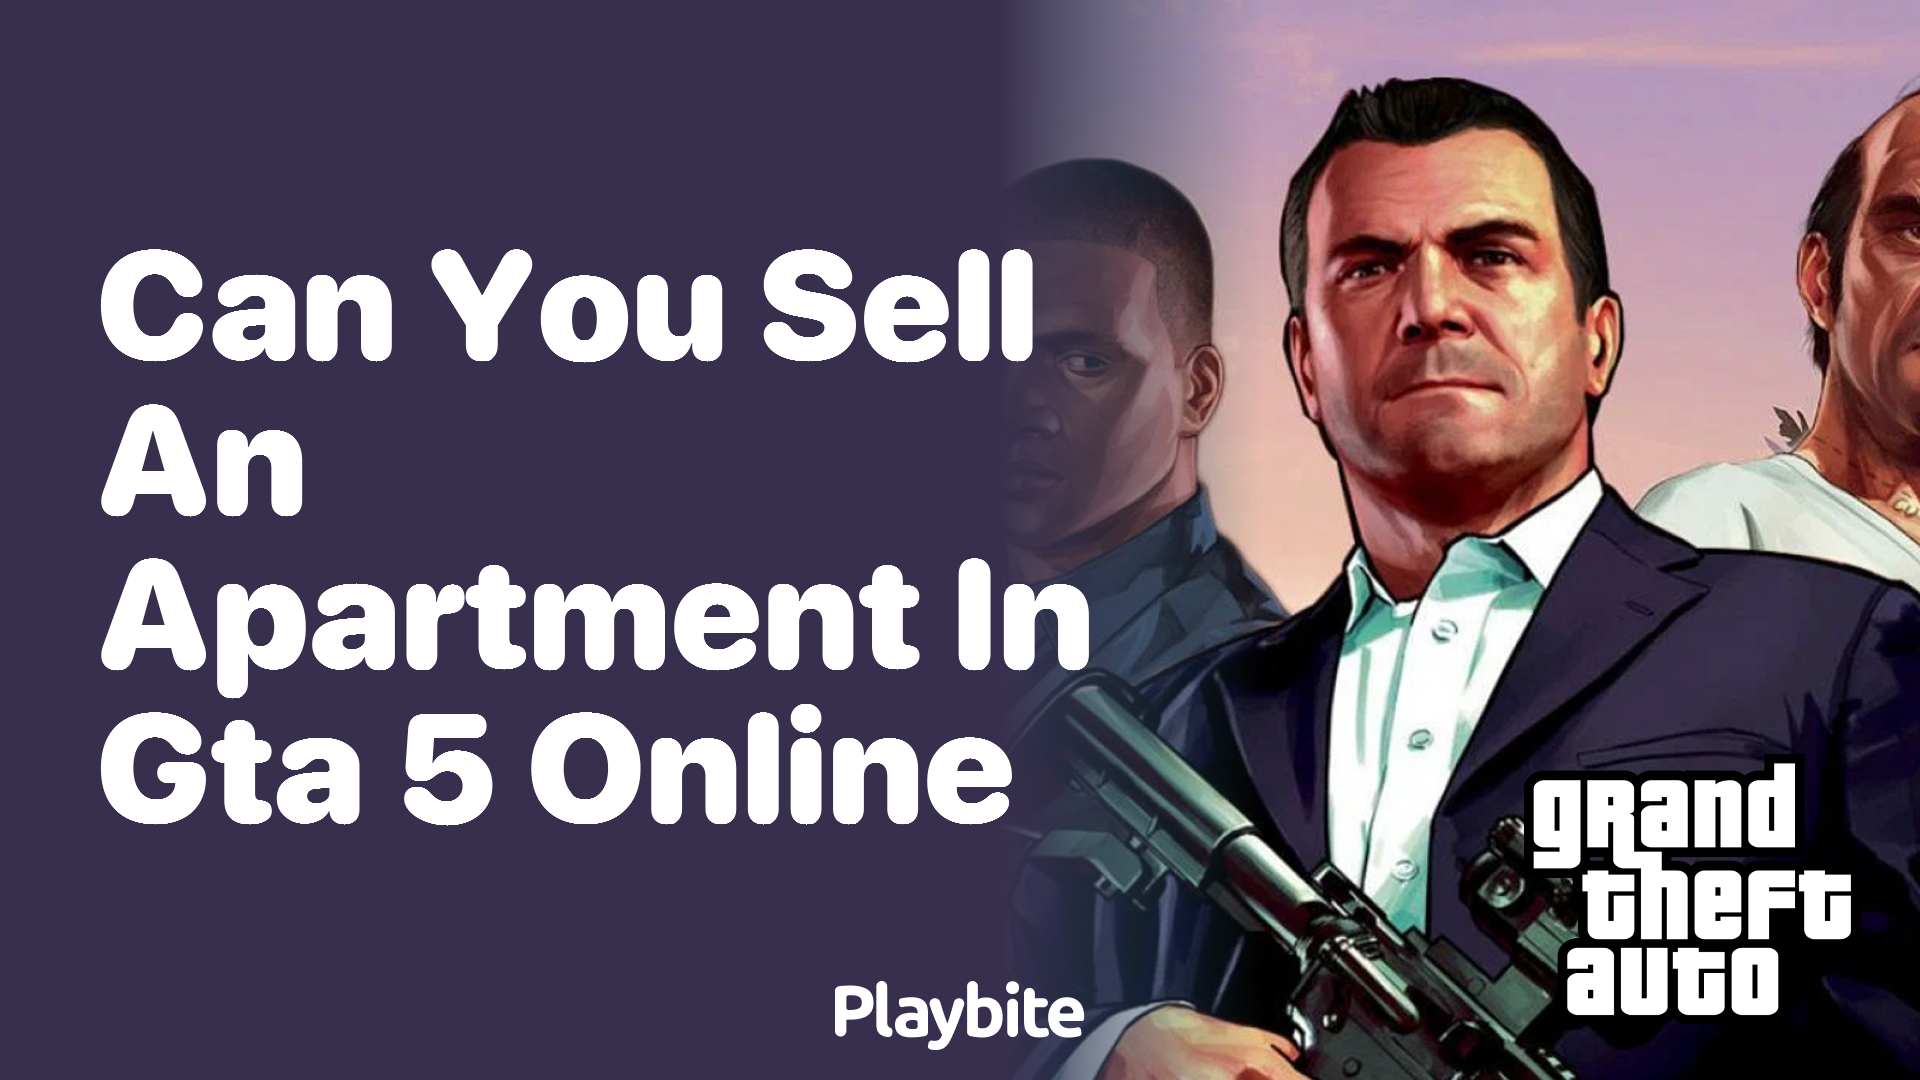 Can You Sell an Apartment in GTA 5 Online?